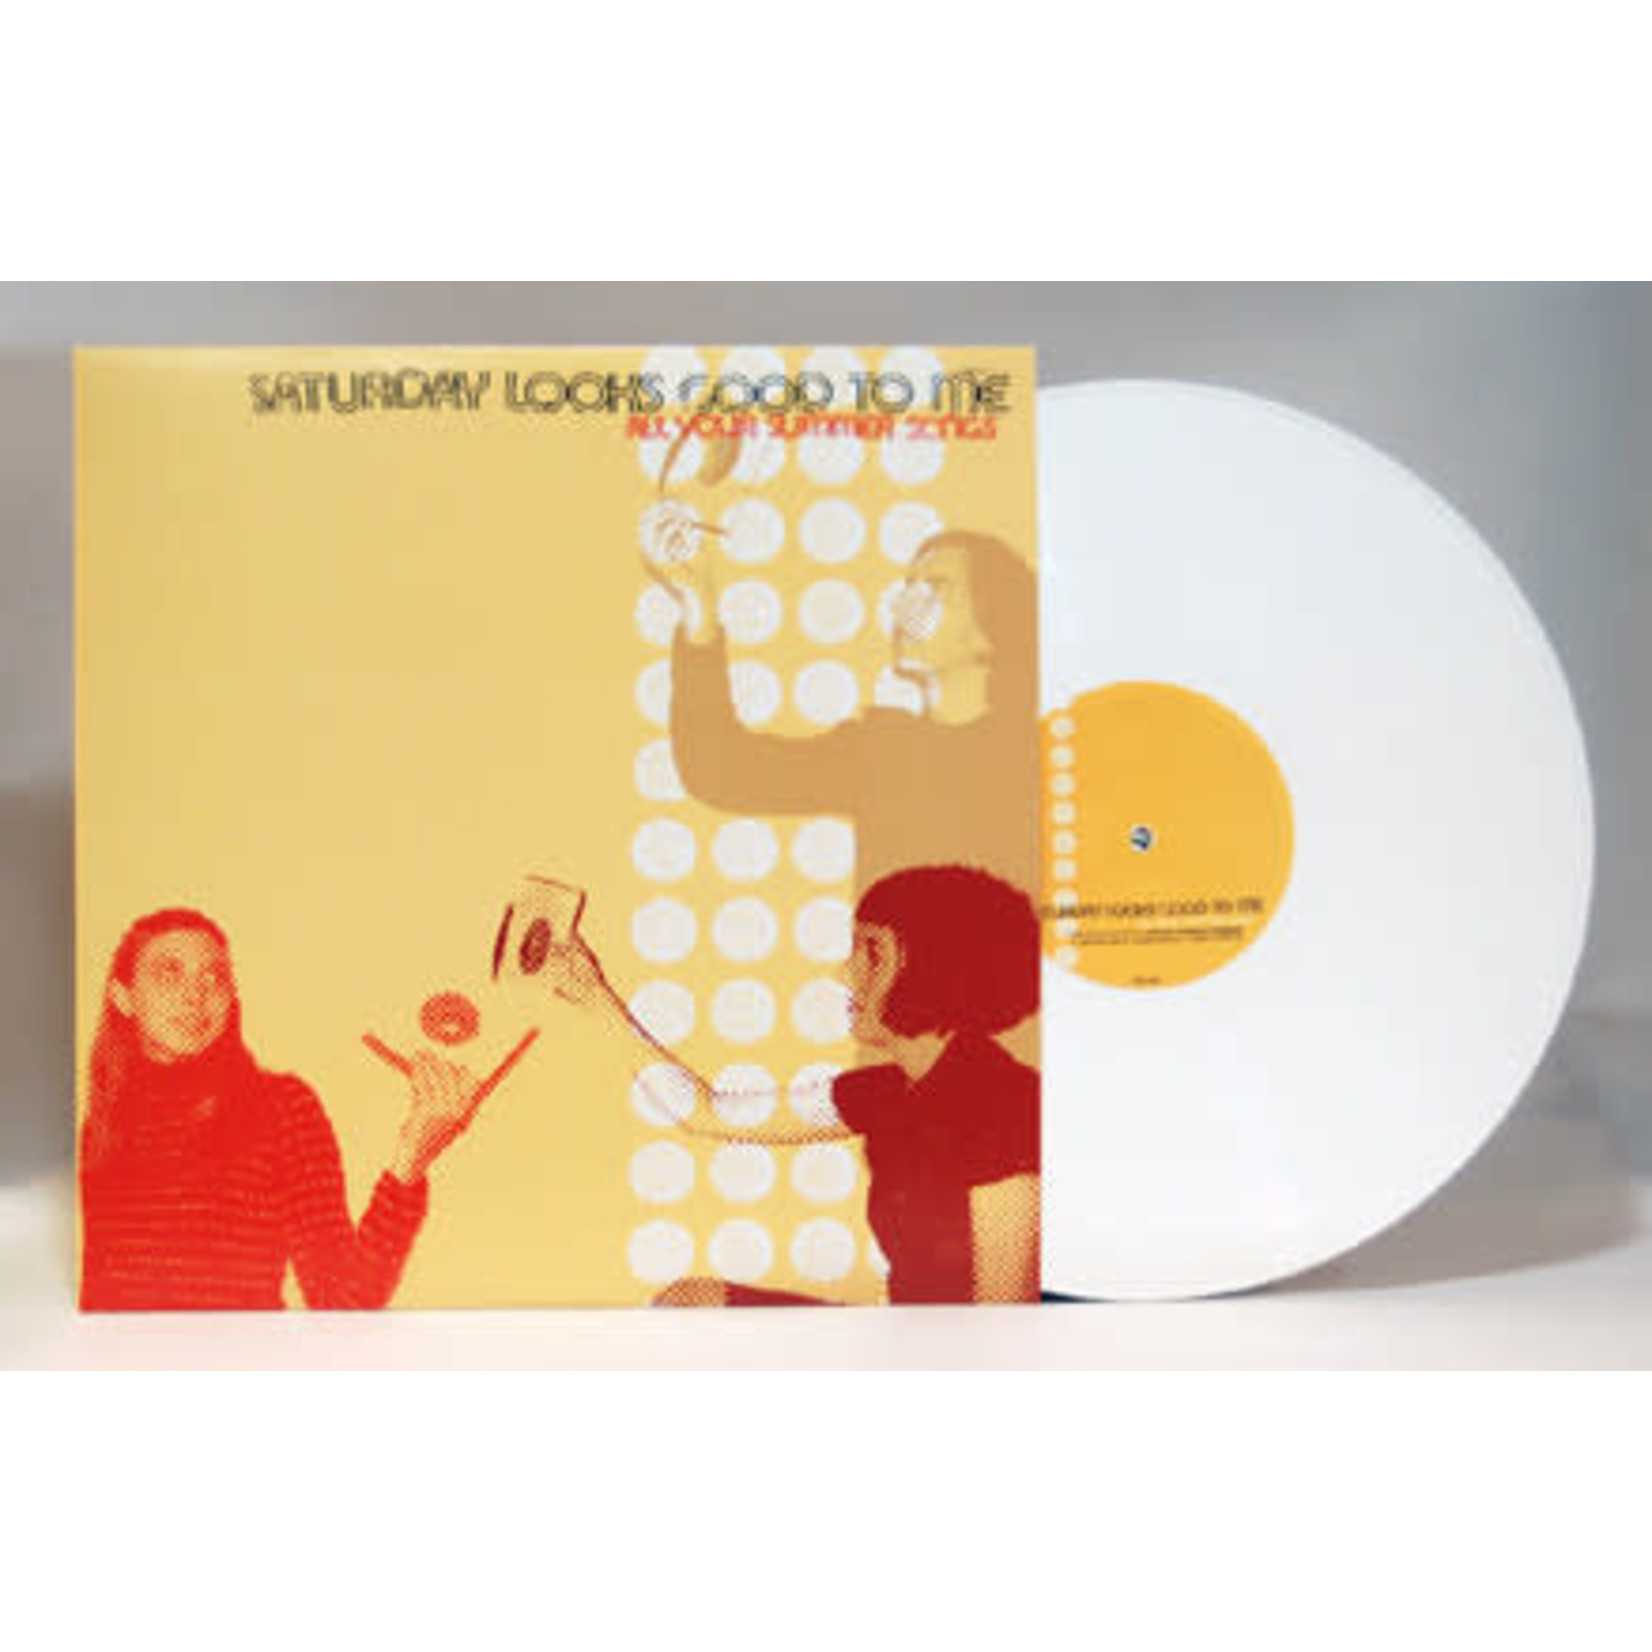 Polyvinyl Saturday Looks Good To Me - All Your Summer Songs (LP) [White]